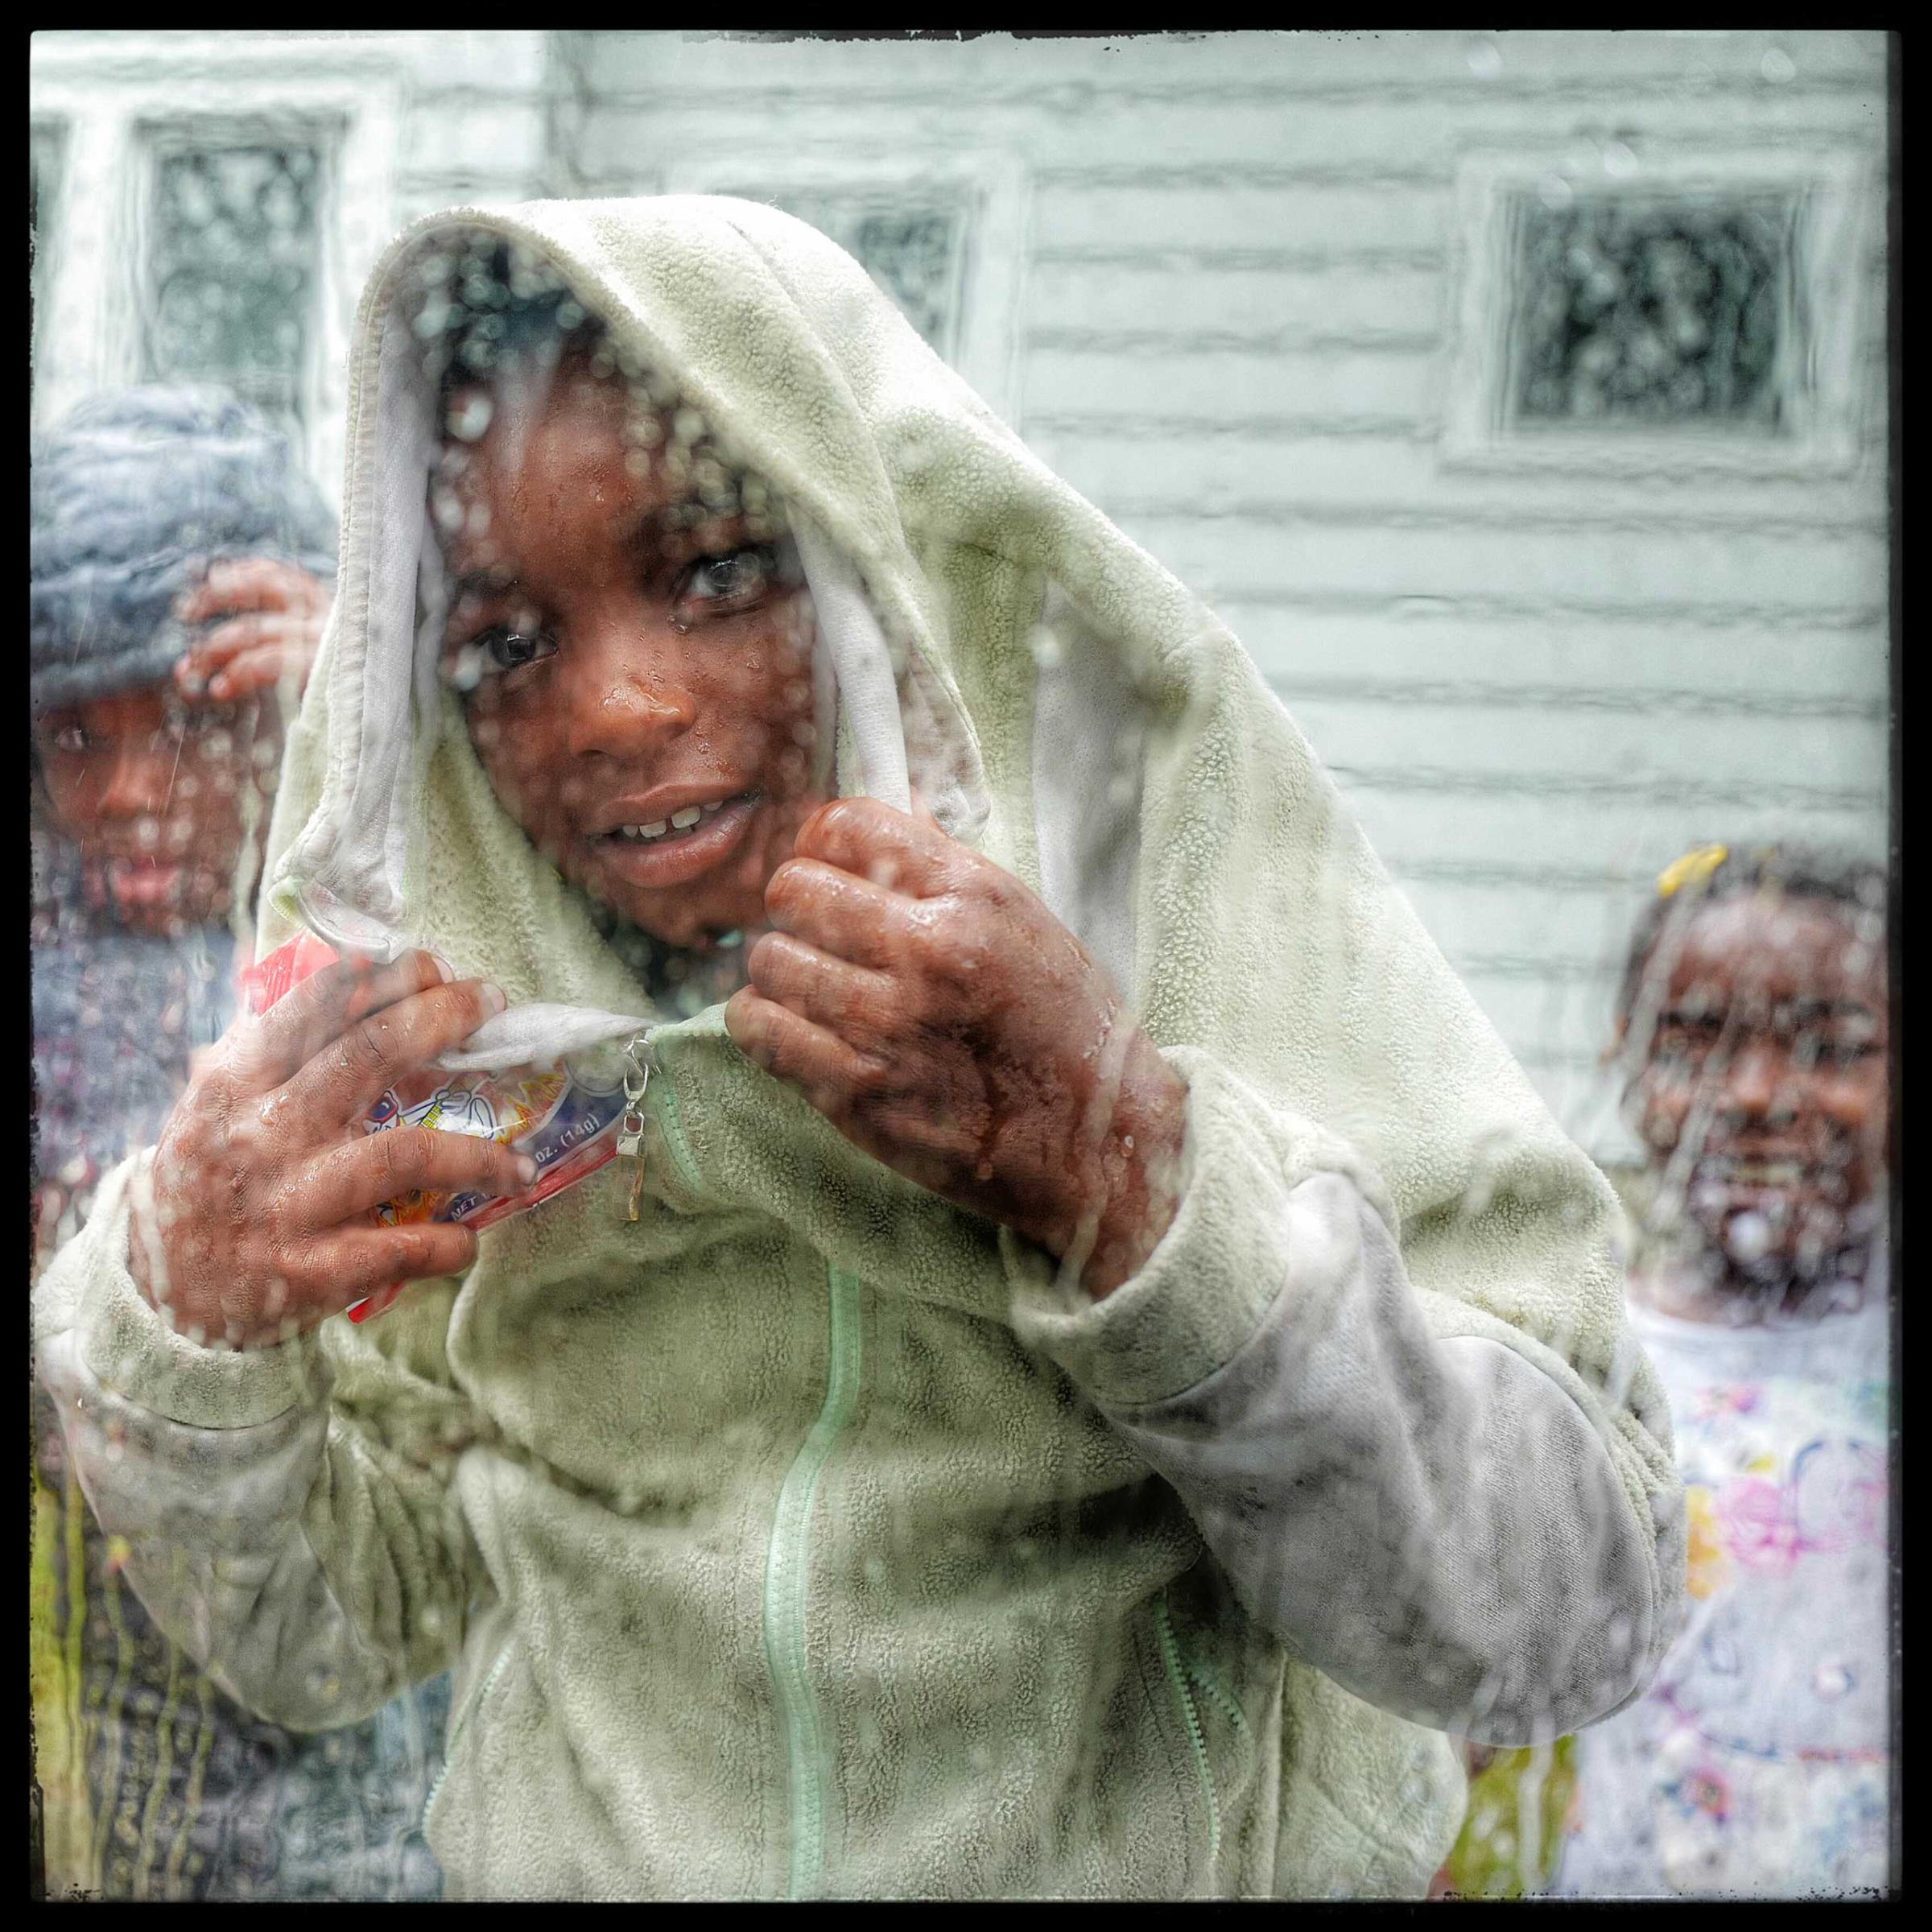 Children in Milwaukee, Winsconsin runs up to the car window to inquire if there was anything to eat.